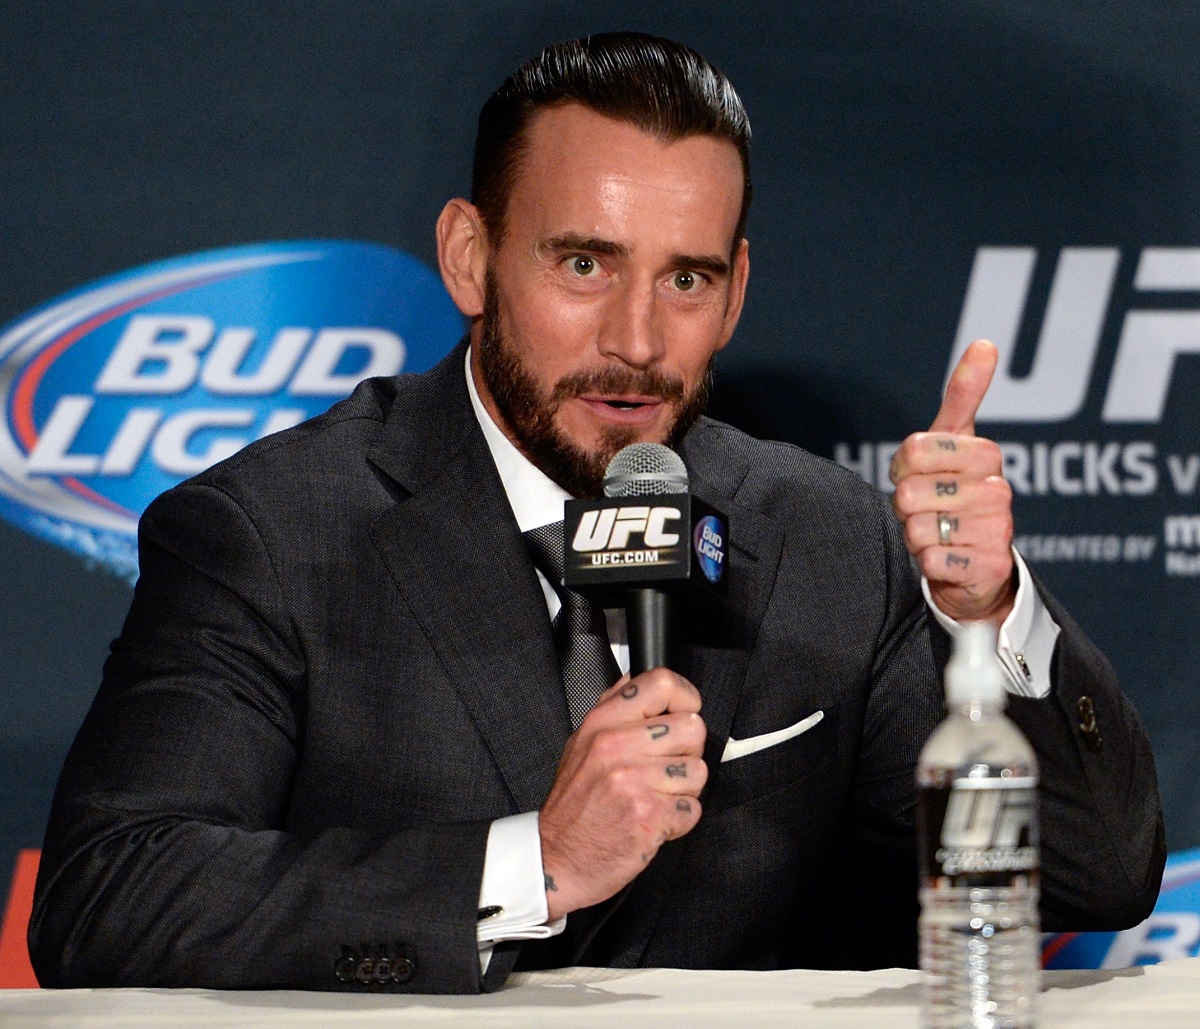 Wrestler CM Punk wears a suit during the 2014 UFC 181 post press conference in Las Vegas.